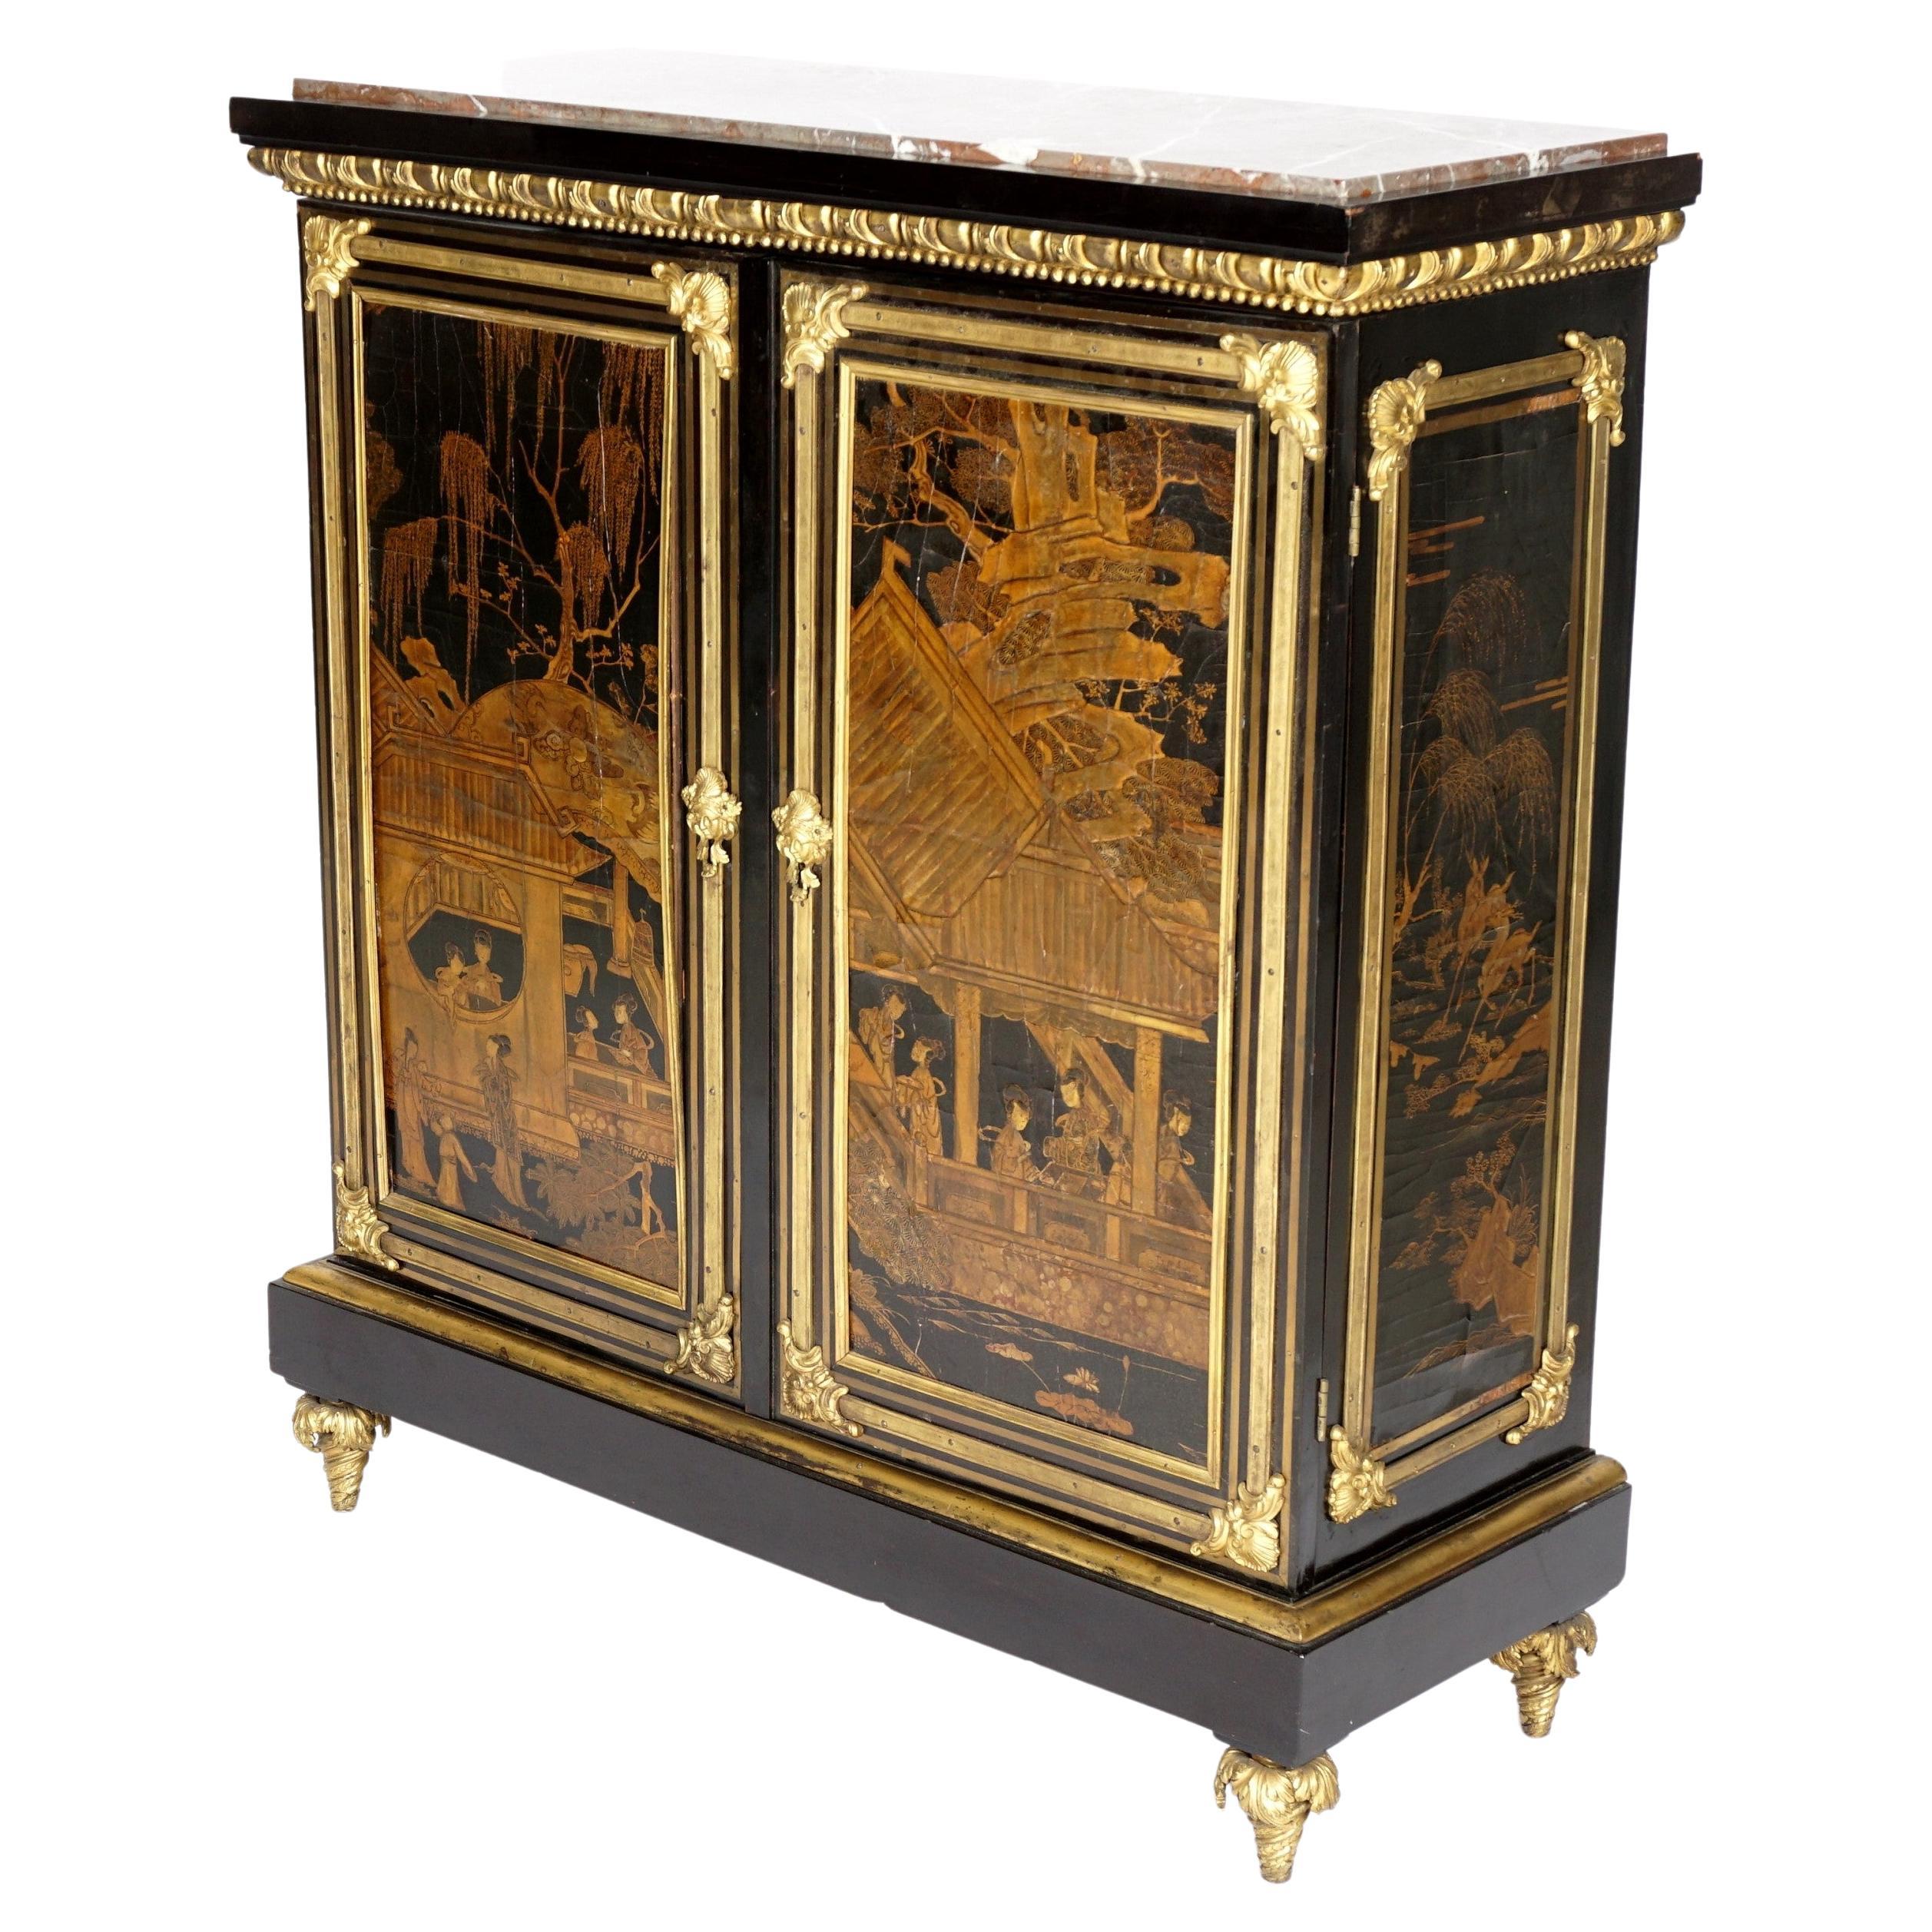 French Ormolu Mounted Inlaid Ebony and Chinese Coromandel Lacquer Cabinet